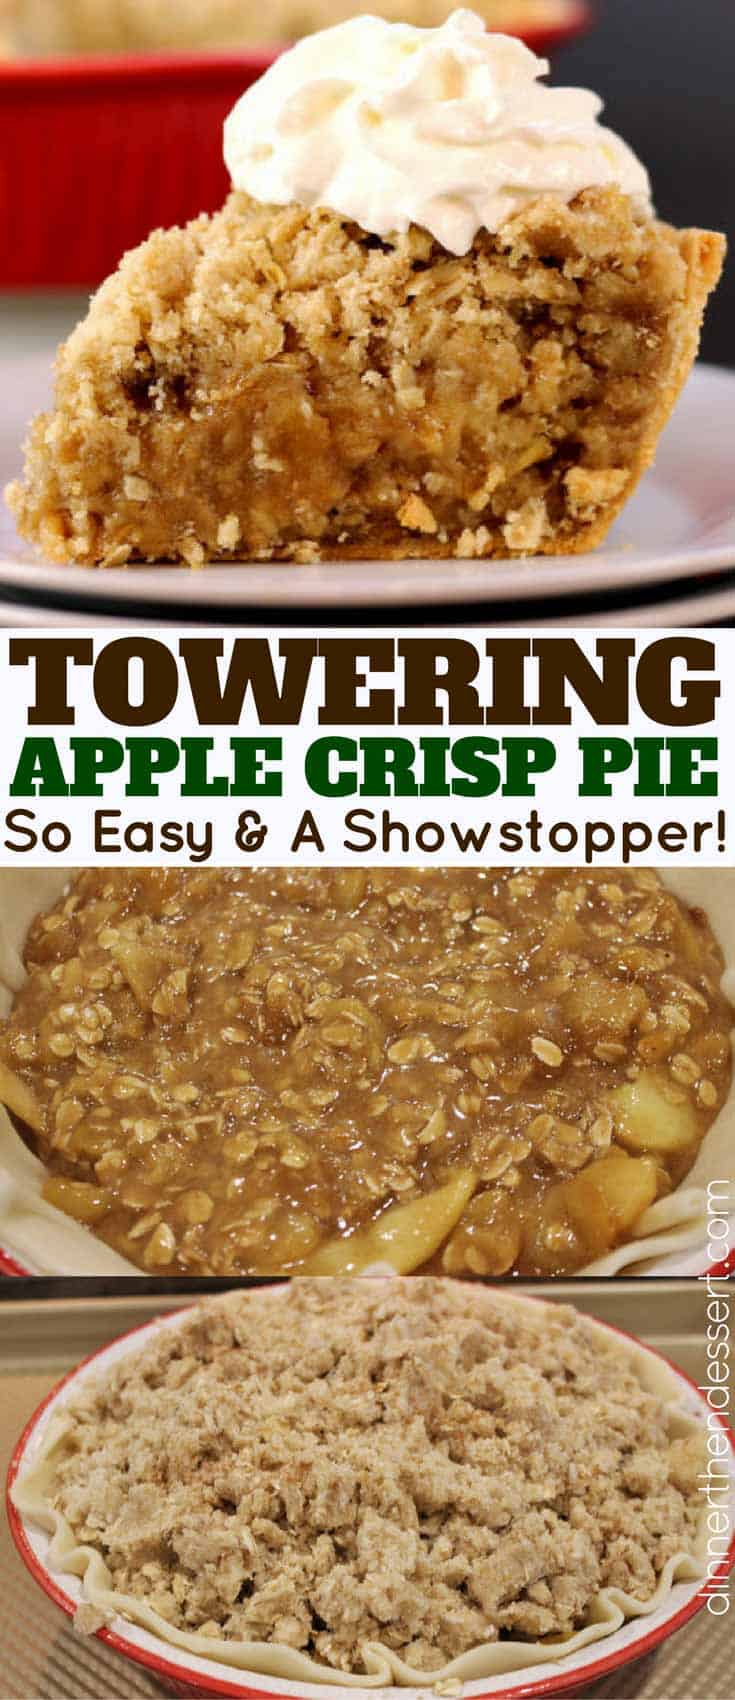 Instead of a classic apple pie or apple crisp you get the best of both worlds with an Apple Crisp Pie! 